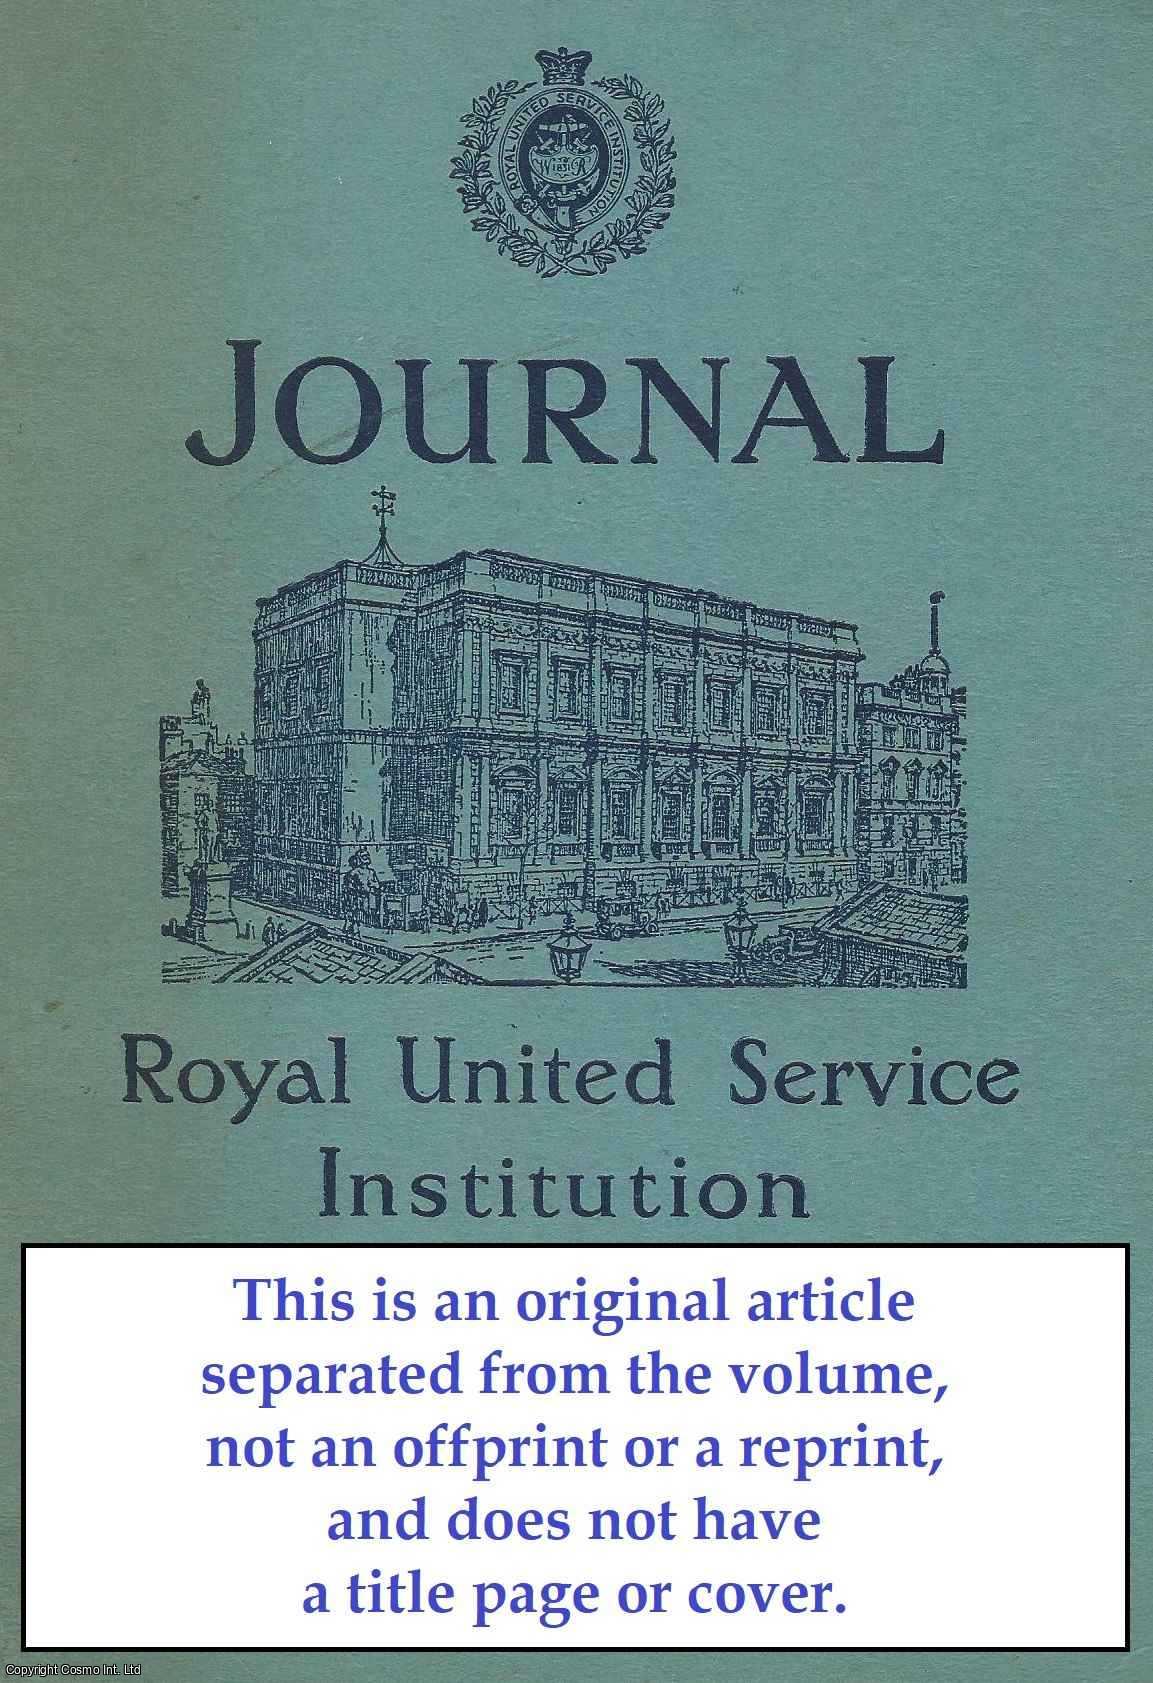 Alastair Buchan - Britain East of Suez: Part One - The Problem of Power. An original article from The Royal United Service Institution Journal, 1967.